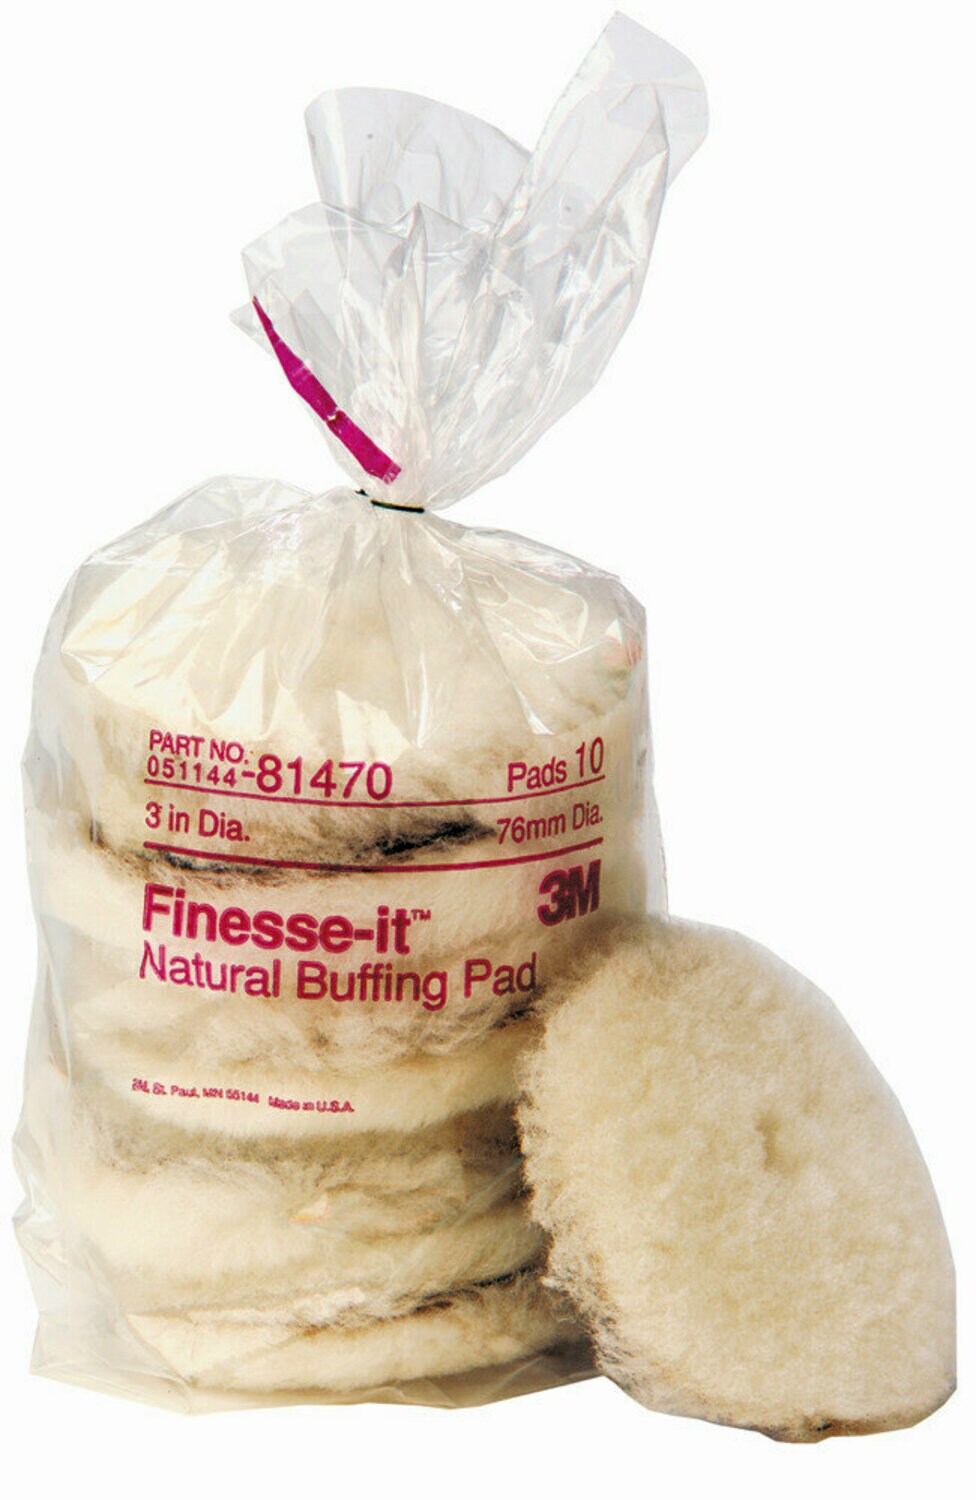 7000000580 - 3M Finesse-it Natural Buffing Pad, 81471, 5-1/4 in, 10/Bag, 50 ea/Case